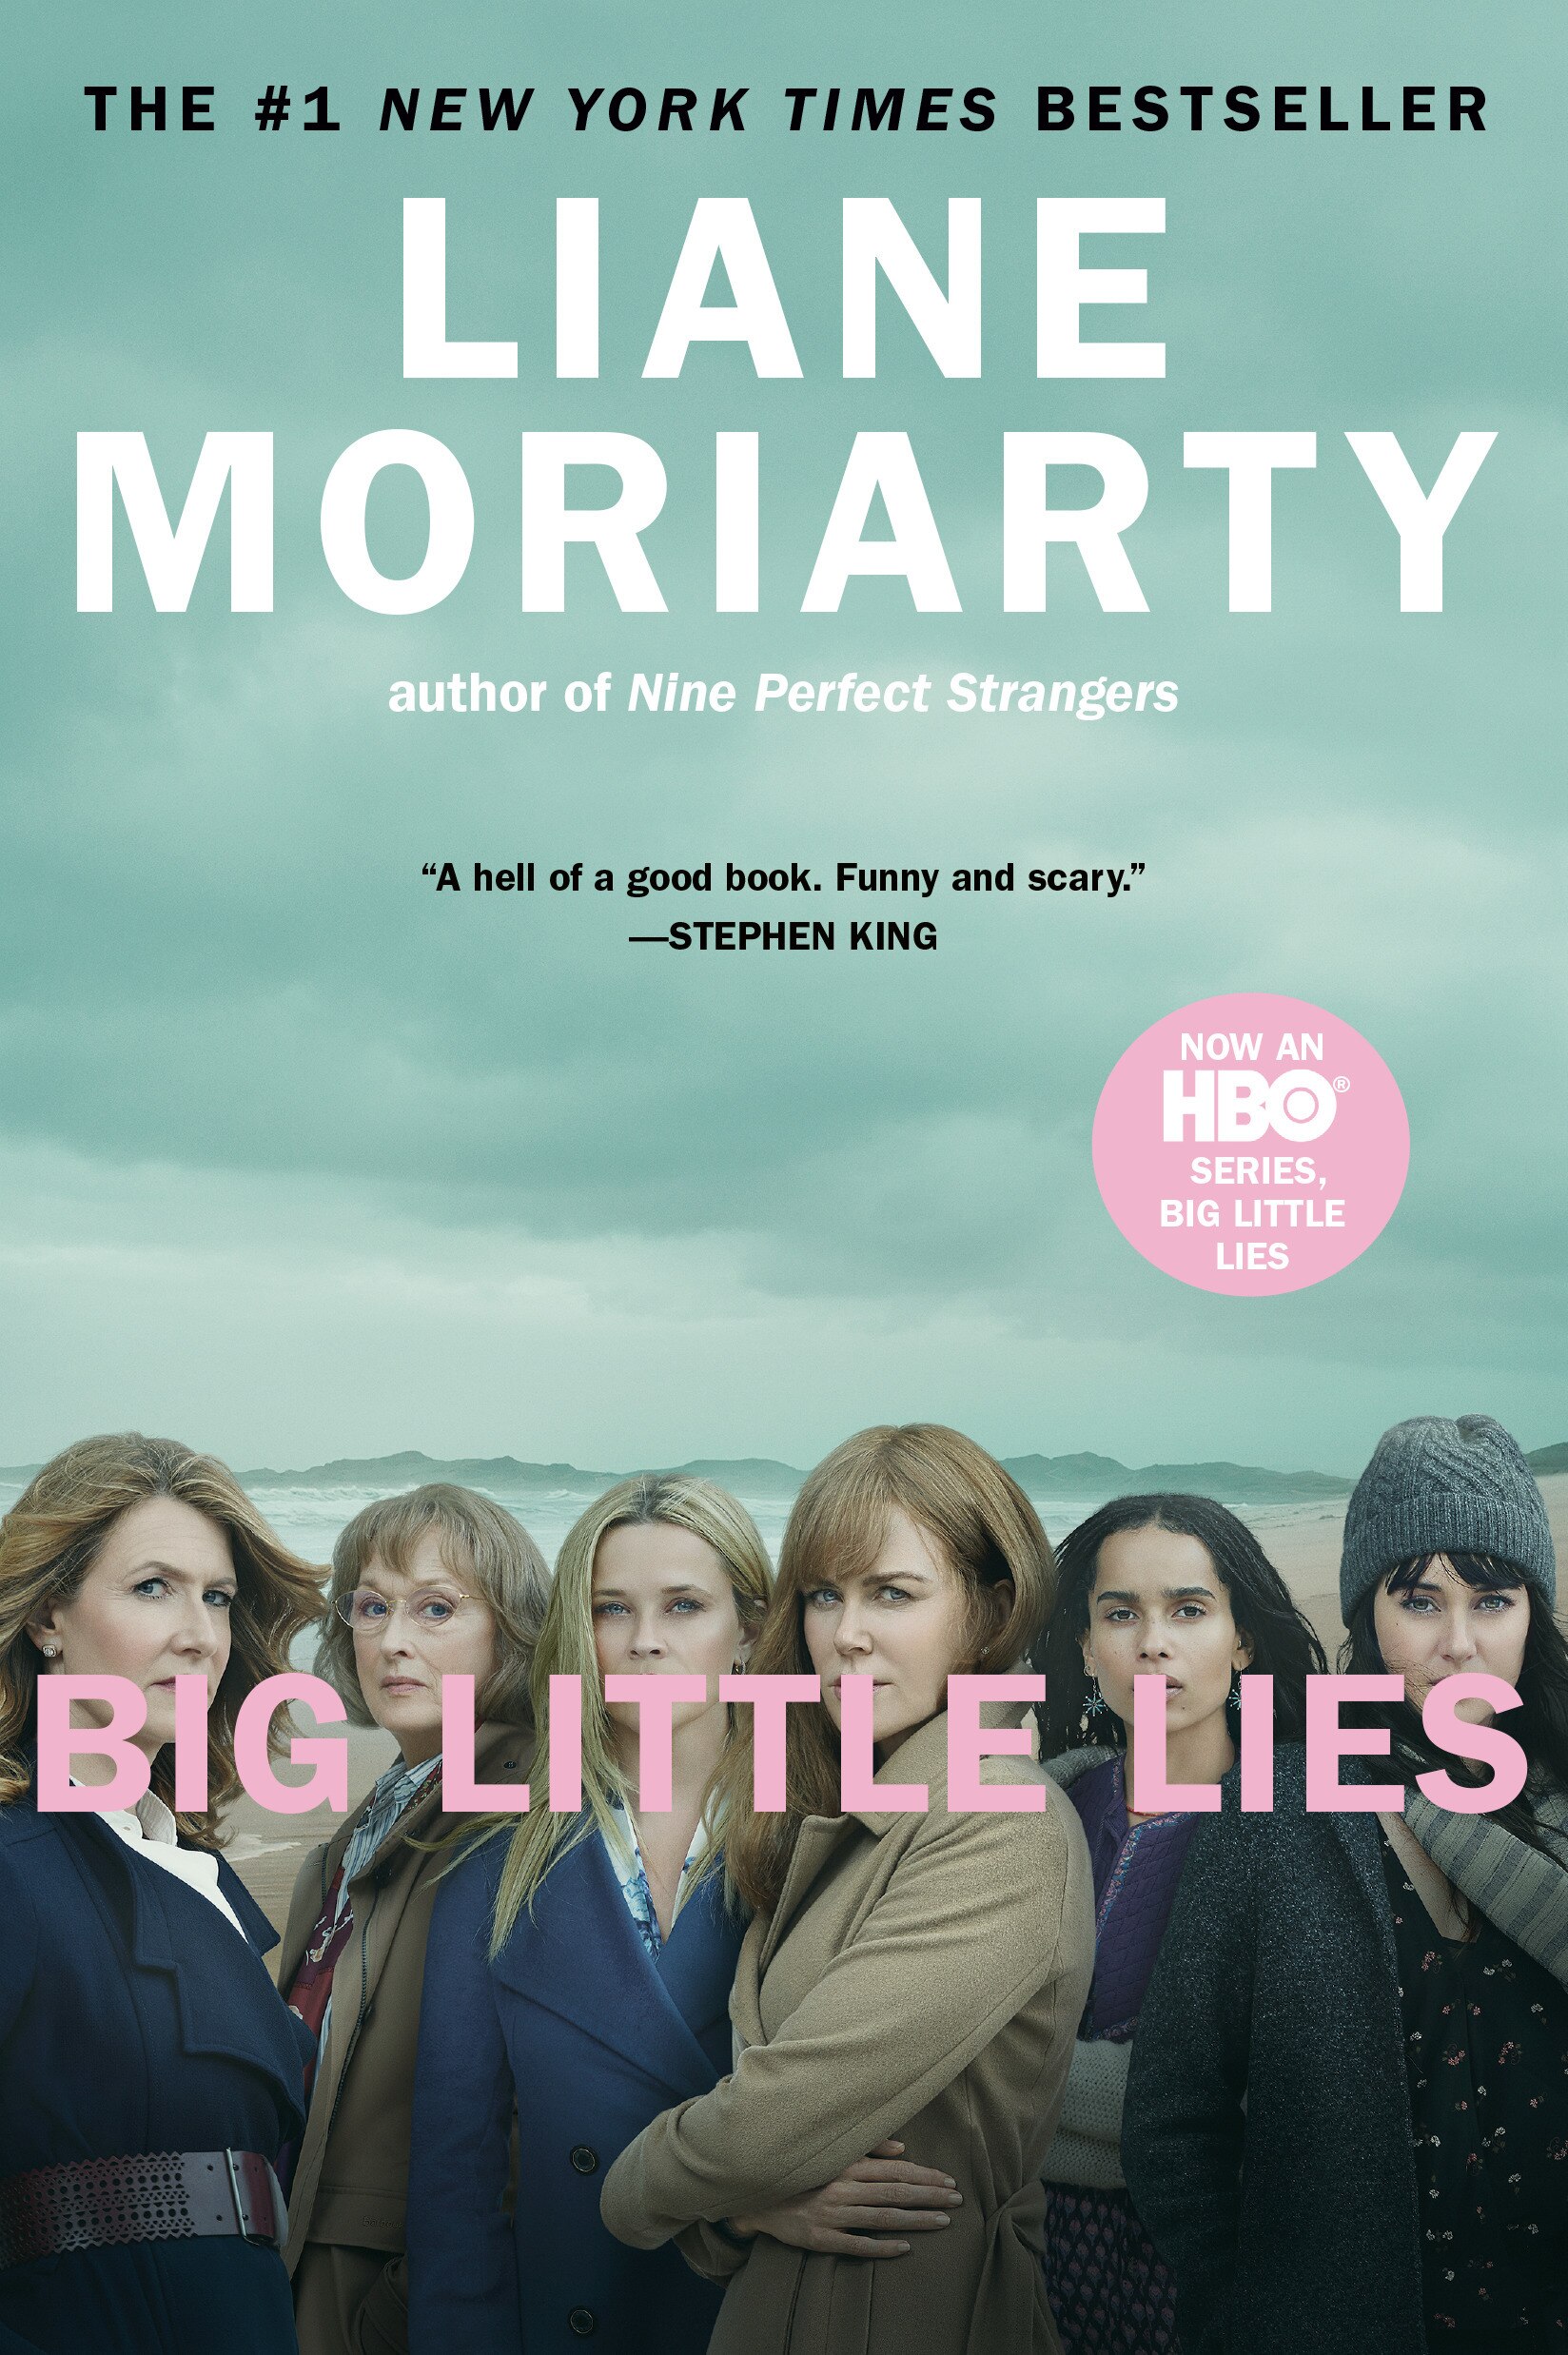 The series tie in book cover of Big Little Lies with the cast on the cover.